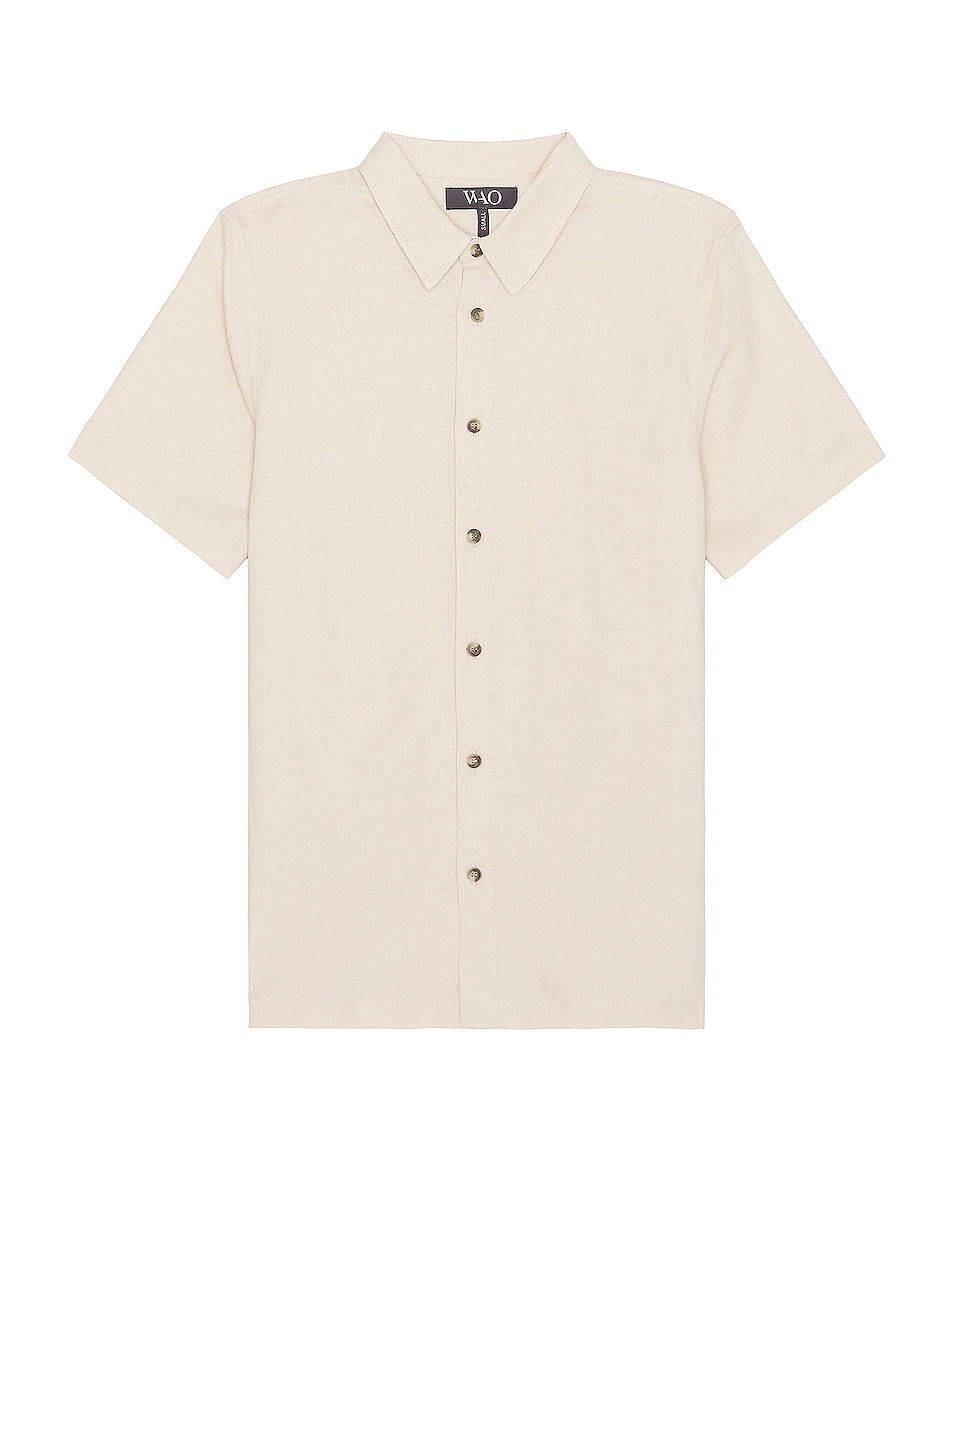 Image 1 of WAO The Short Sleeve Shirt in Natural